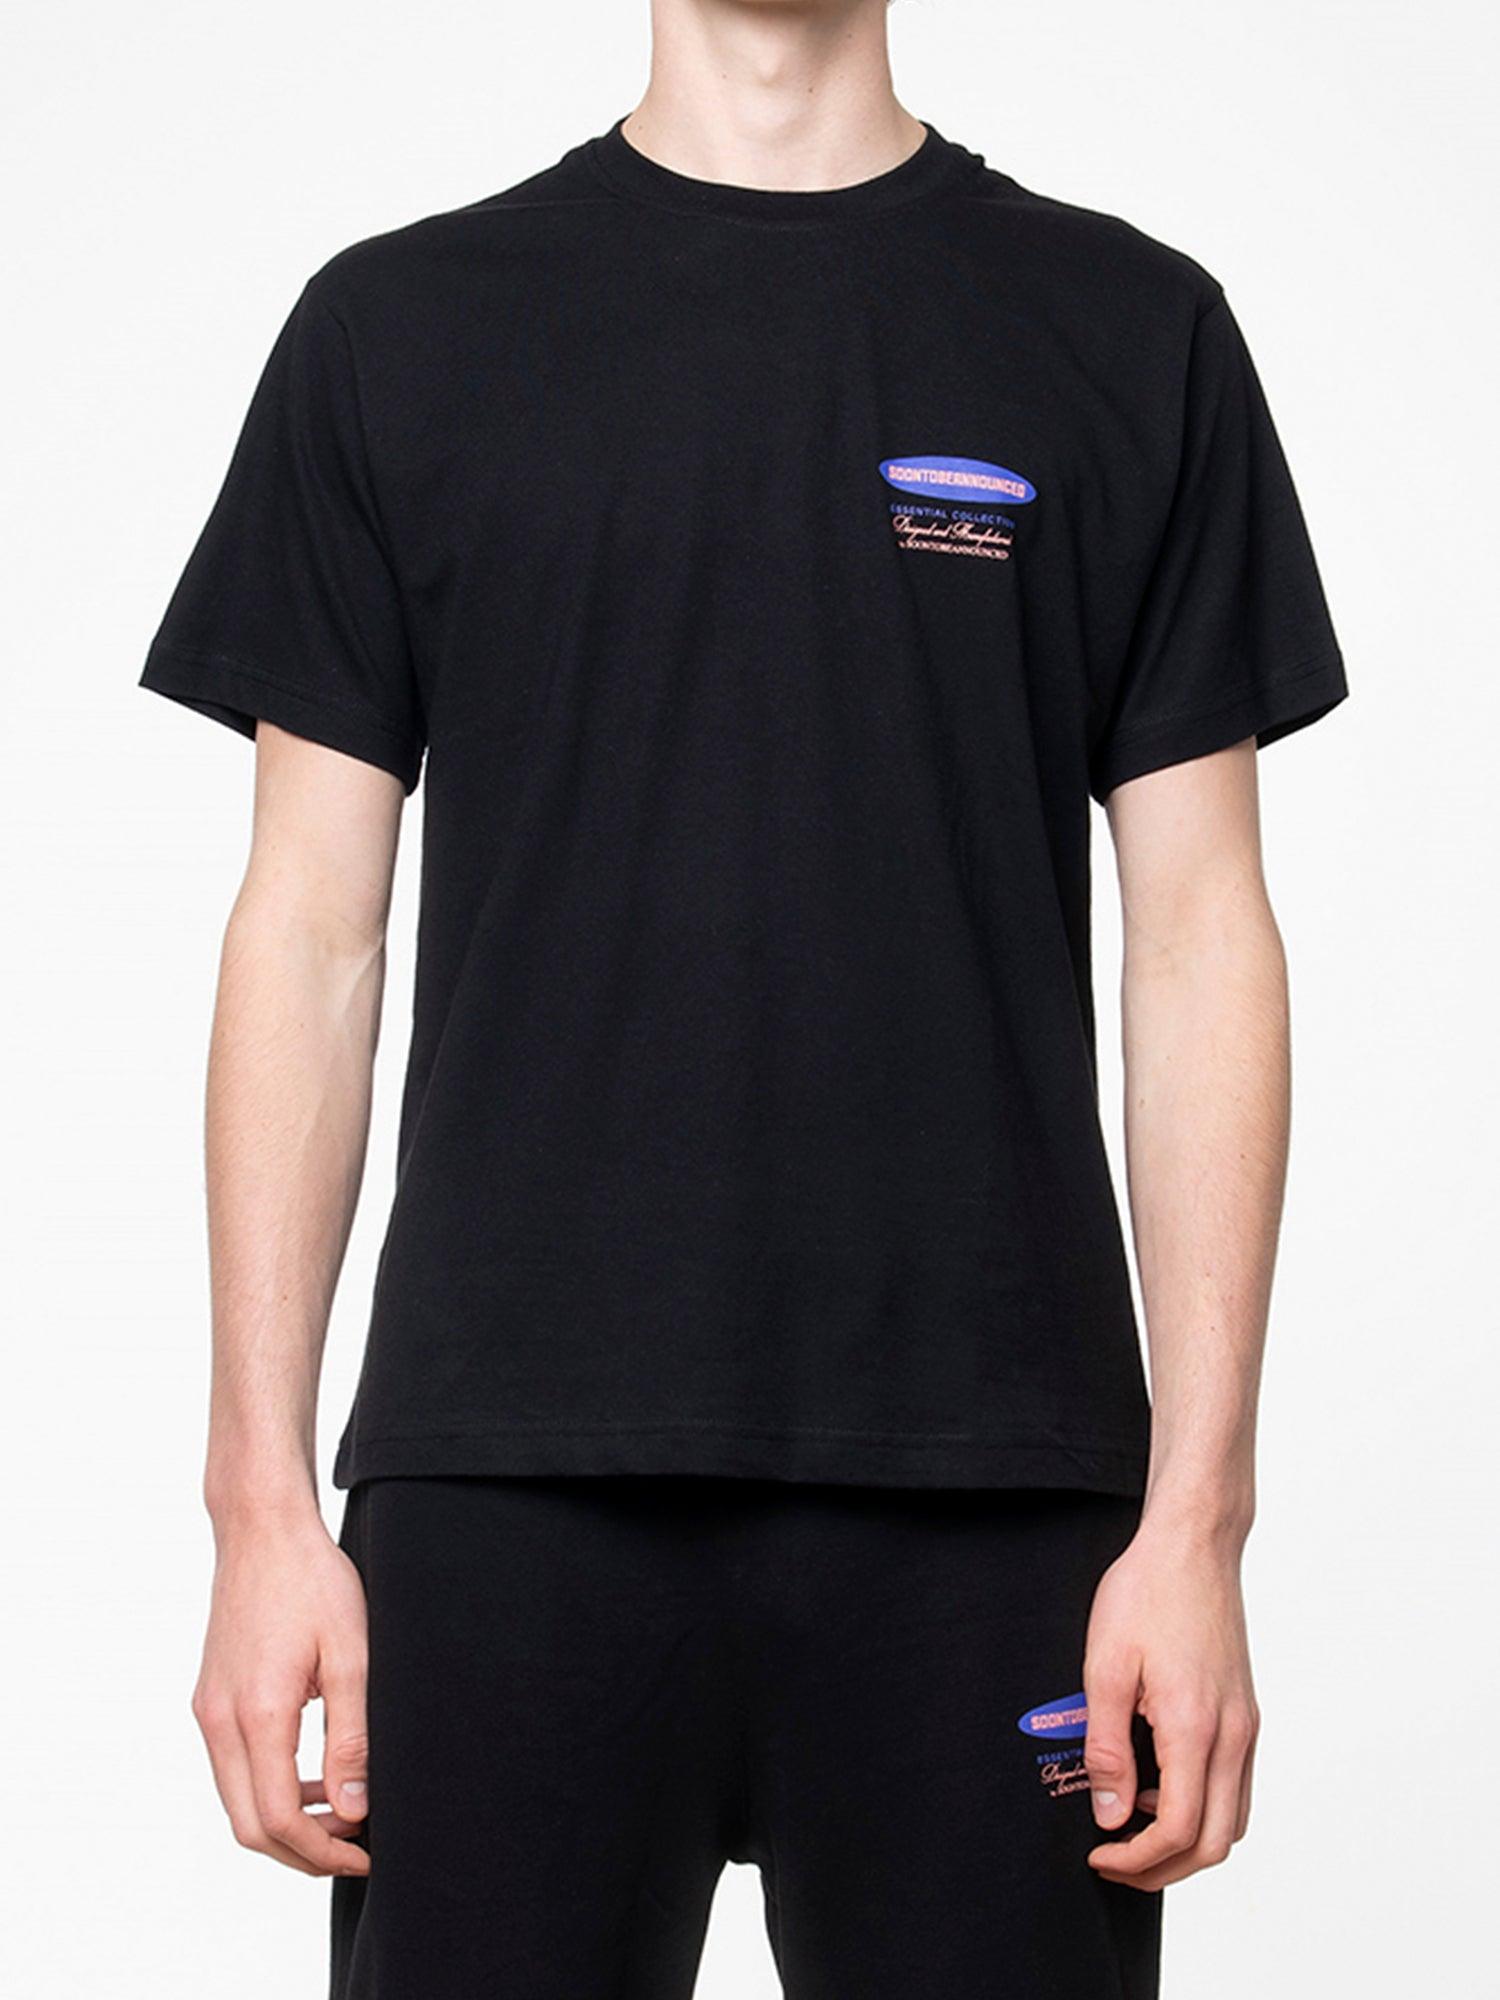 Essentials Logo Regular Fit S/S T-Shirt - SOON TO BE ANNOUNCED